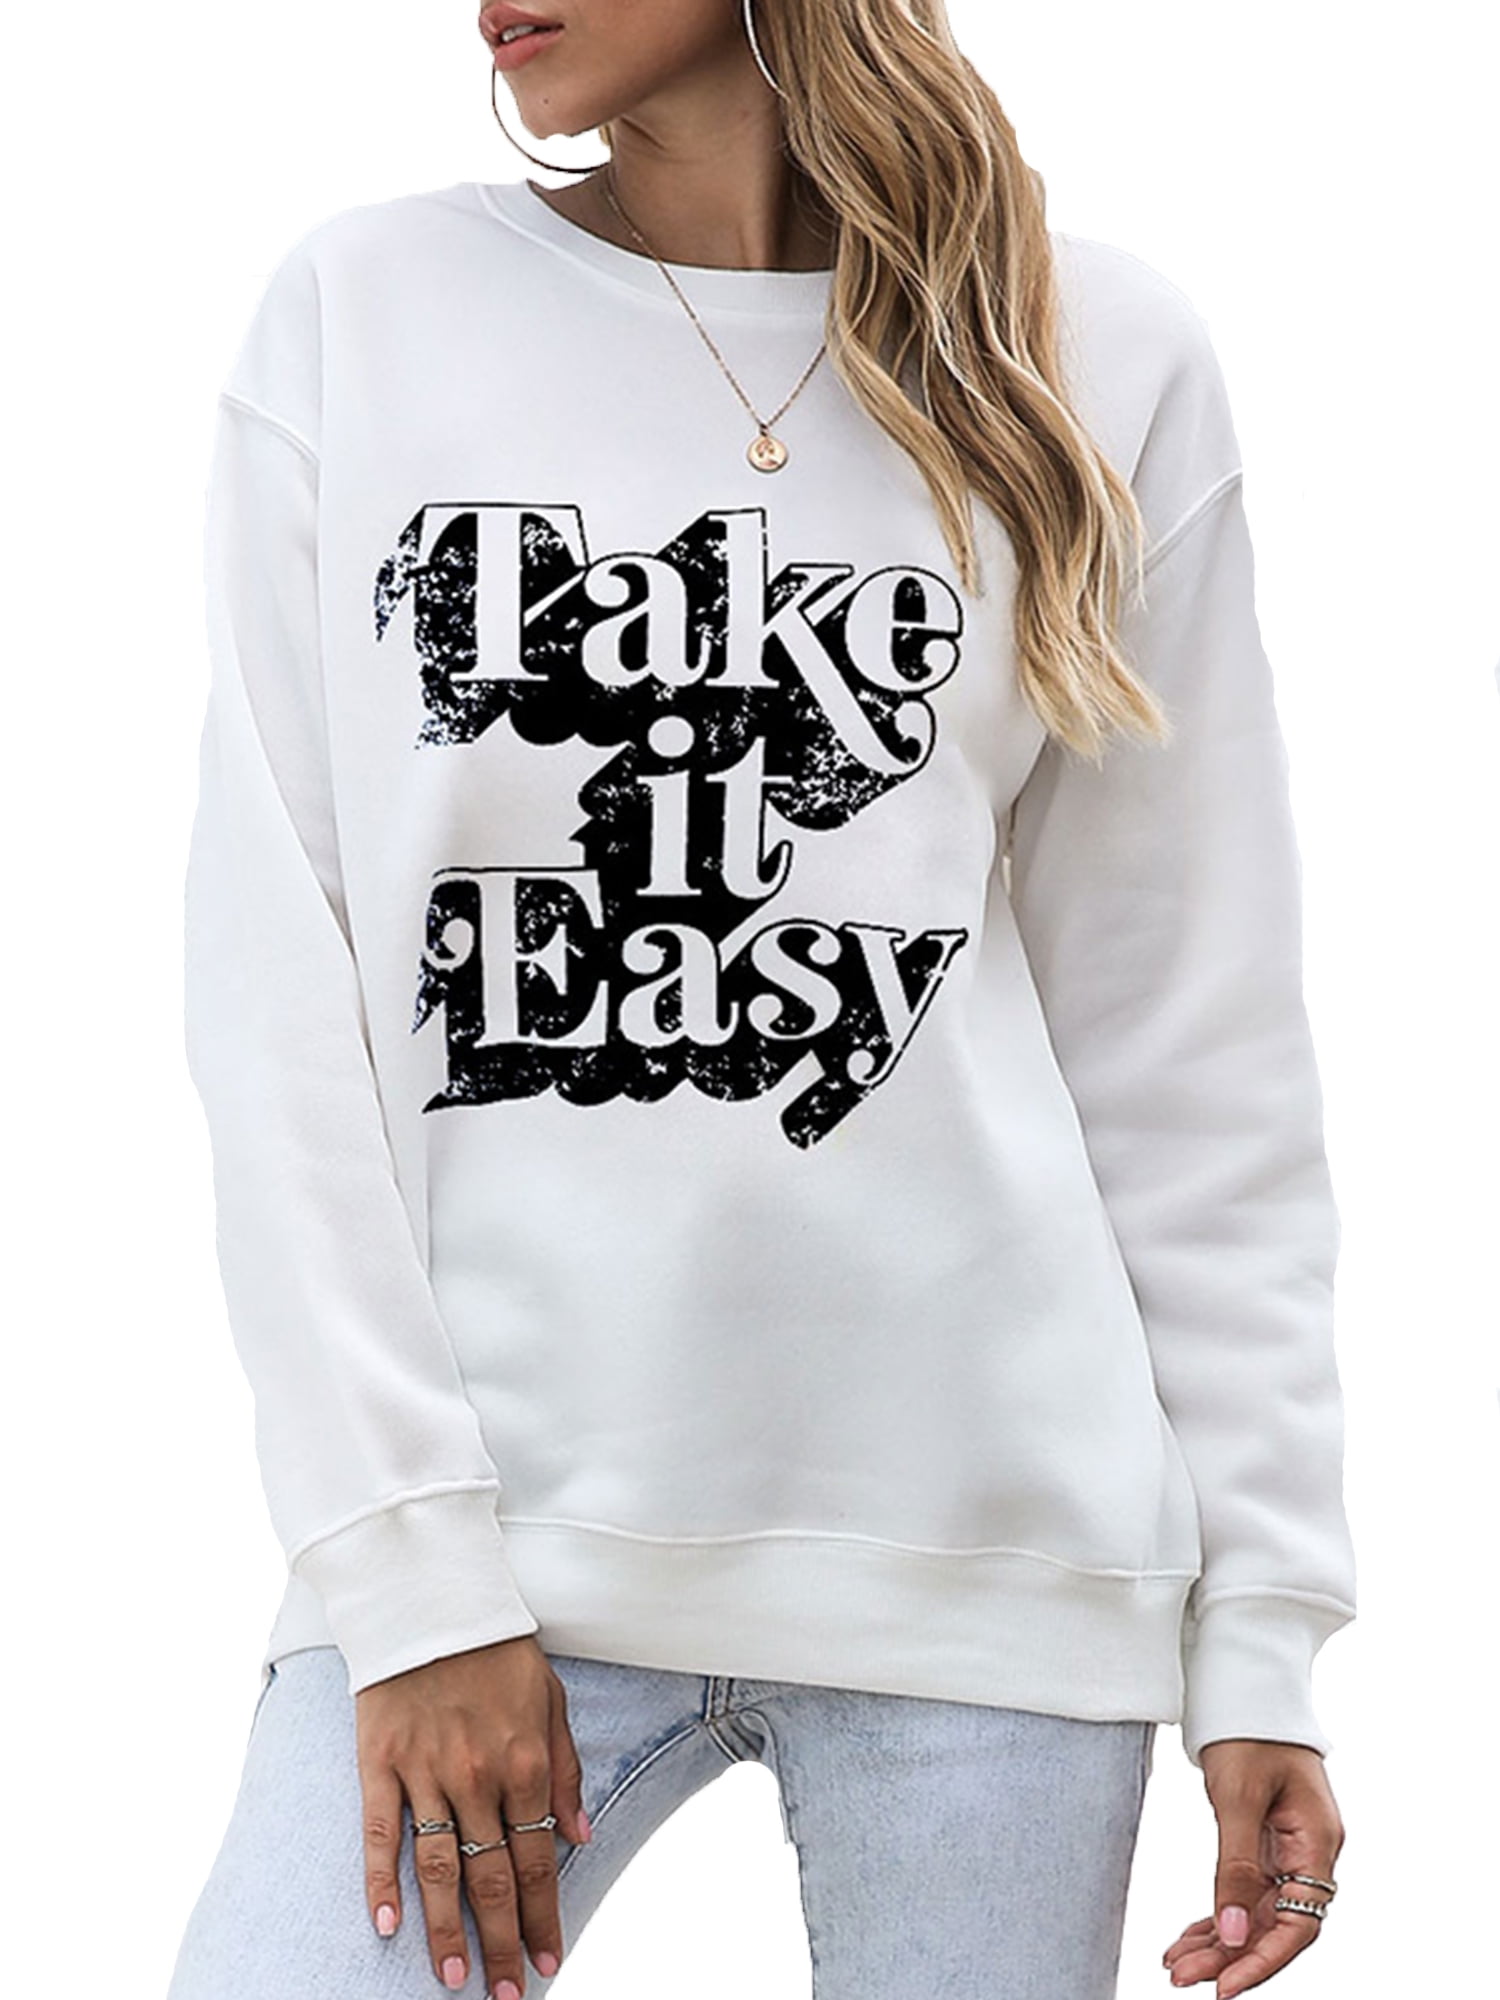 Swyss Sweatshirt,Women USA Letter Printed Long-Sleeve Hoodie Casual Fashion Tops Hooded Pullover 